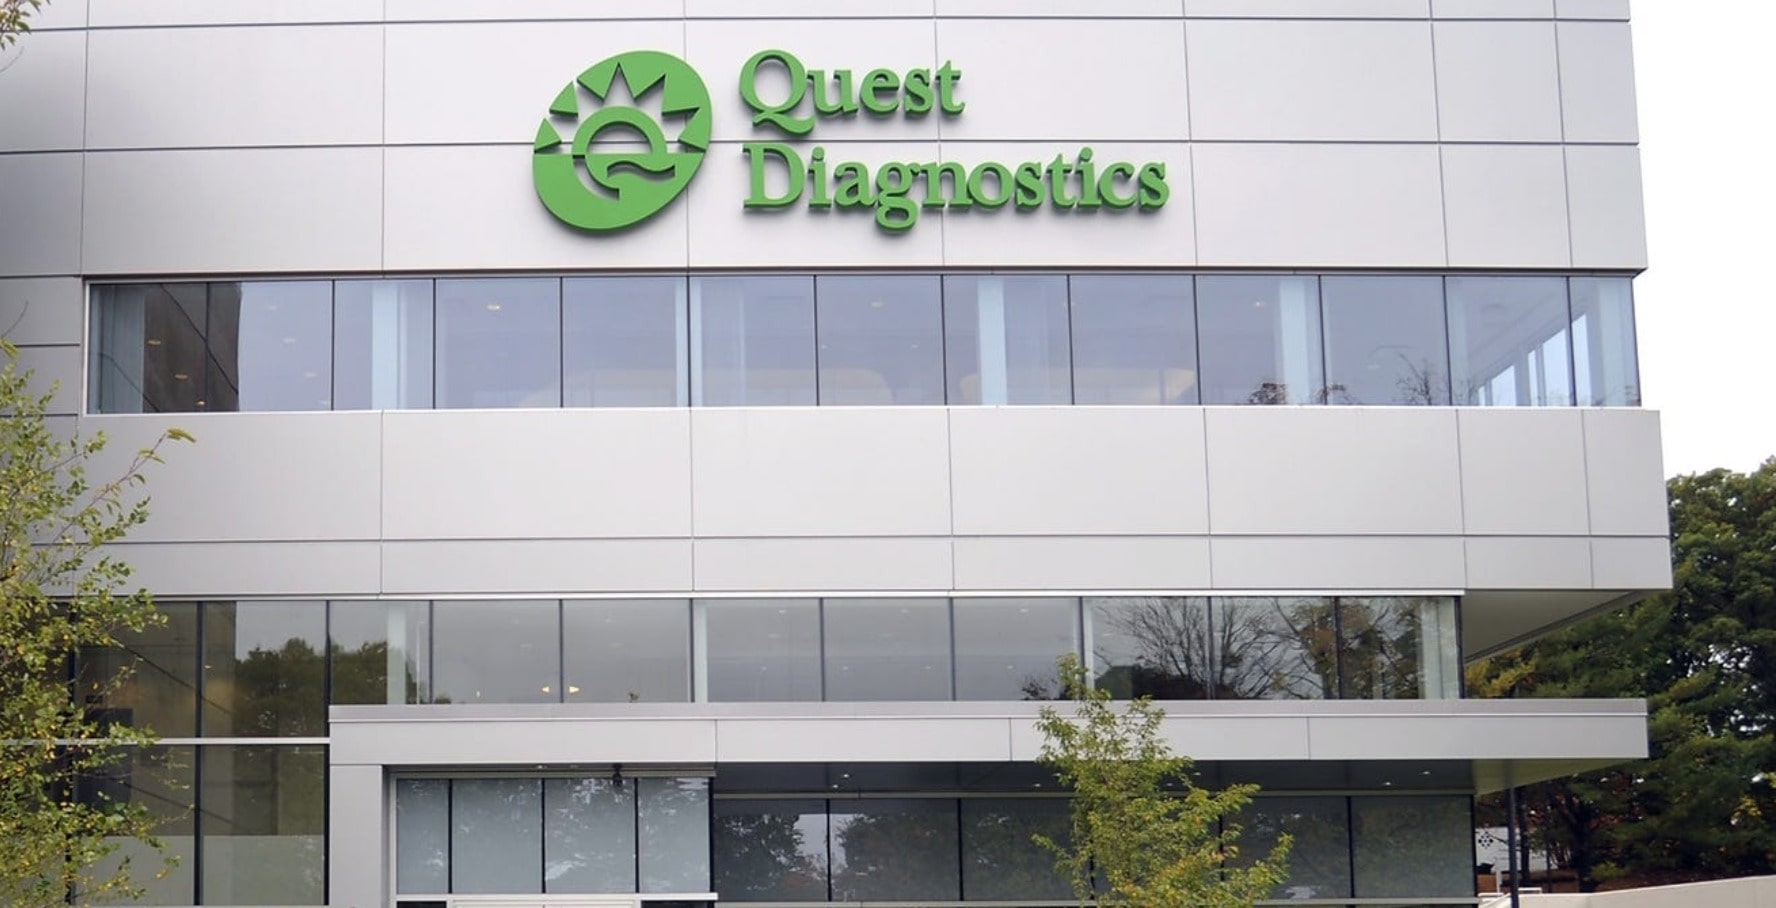 Does Fake Pee Work At Quest Diagnostics (Tampa, Gainesville, Or Any Other Location)?